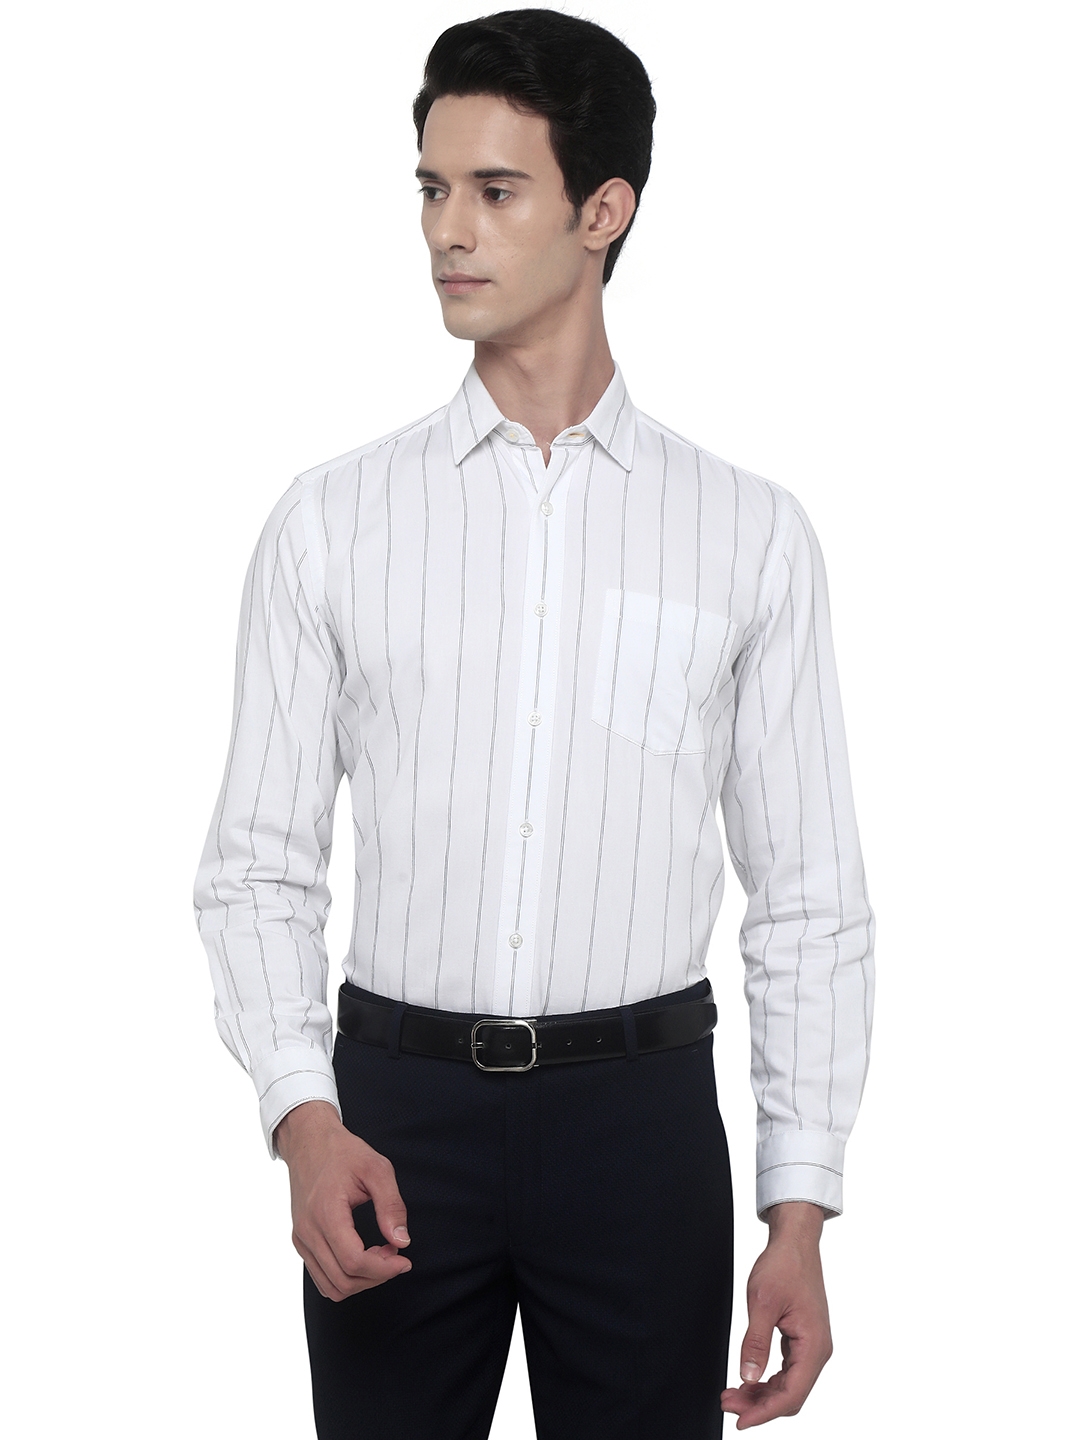 Greenfibre | White Striped Slim Fit Casual Shirt | Greenfibre